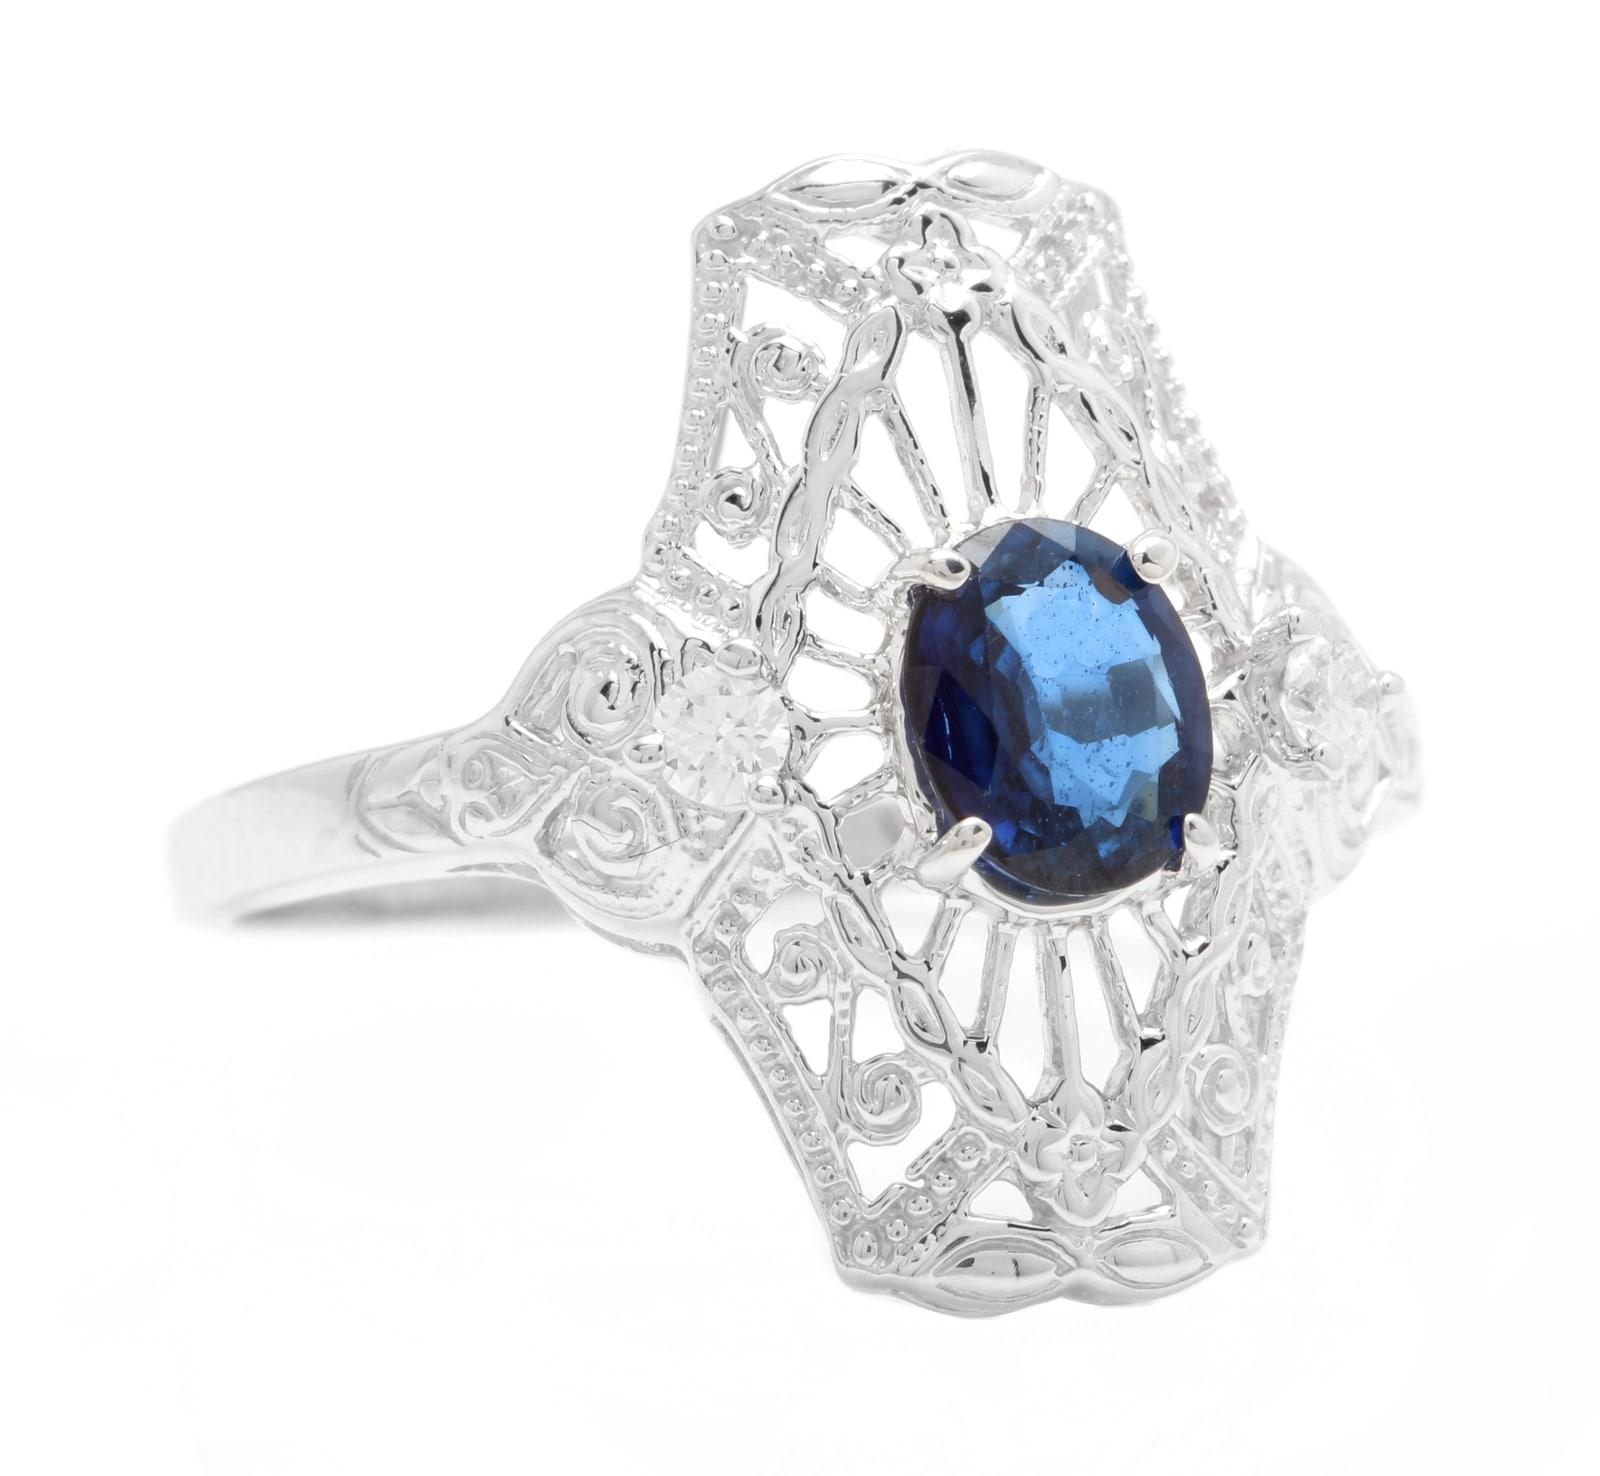 Art Deco Style Natural Sapphire and Diamond 14K Solid White Gold Ring

Suggested Replacement Value: Approx. $2,500.00

Stamped: 14K

Total Natural Oval Cut Sapphire Weights: Approx. 0.80 Carats 

Sapphire Measures: Approx. 6.00 x 5.00mm

Natural